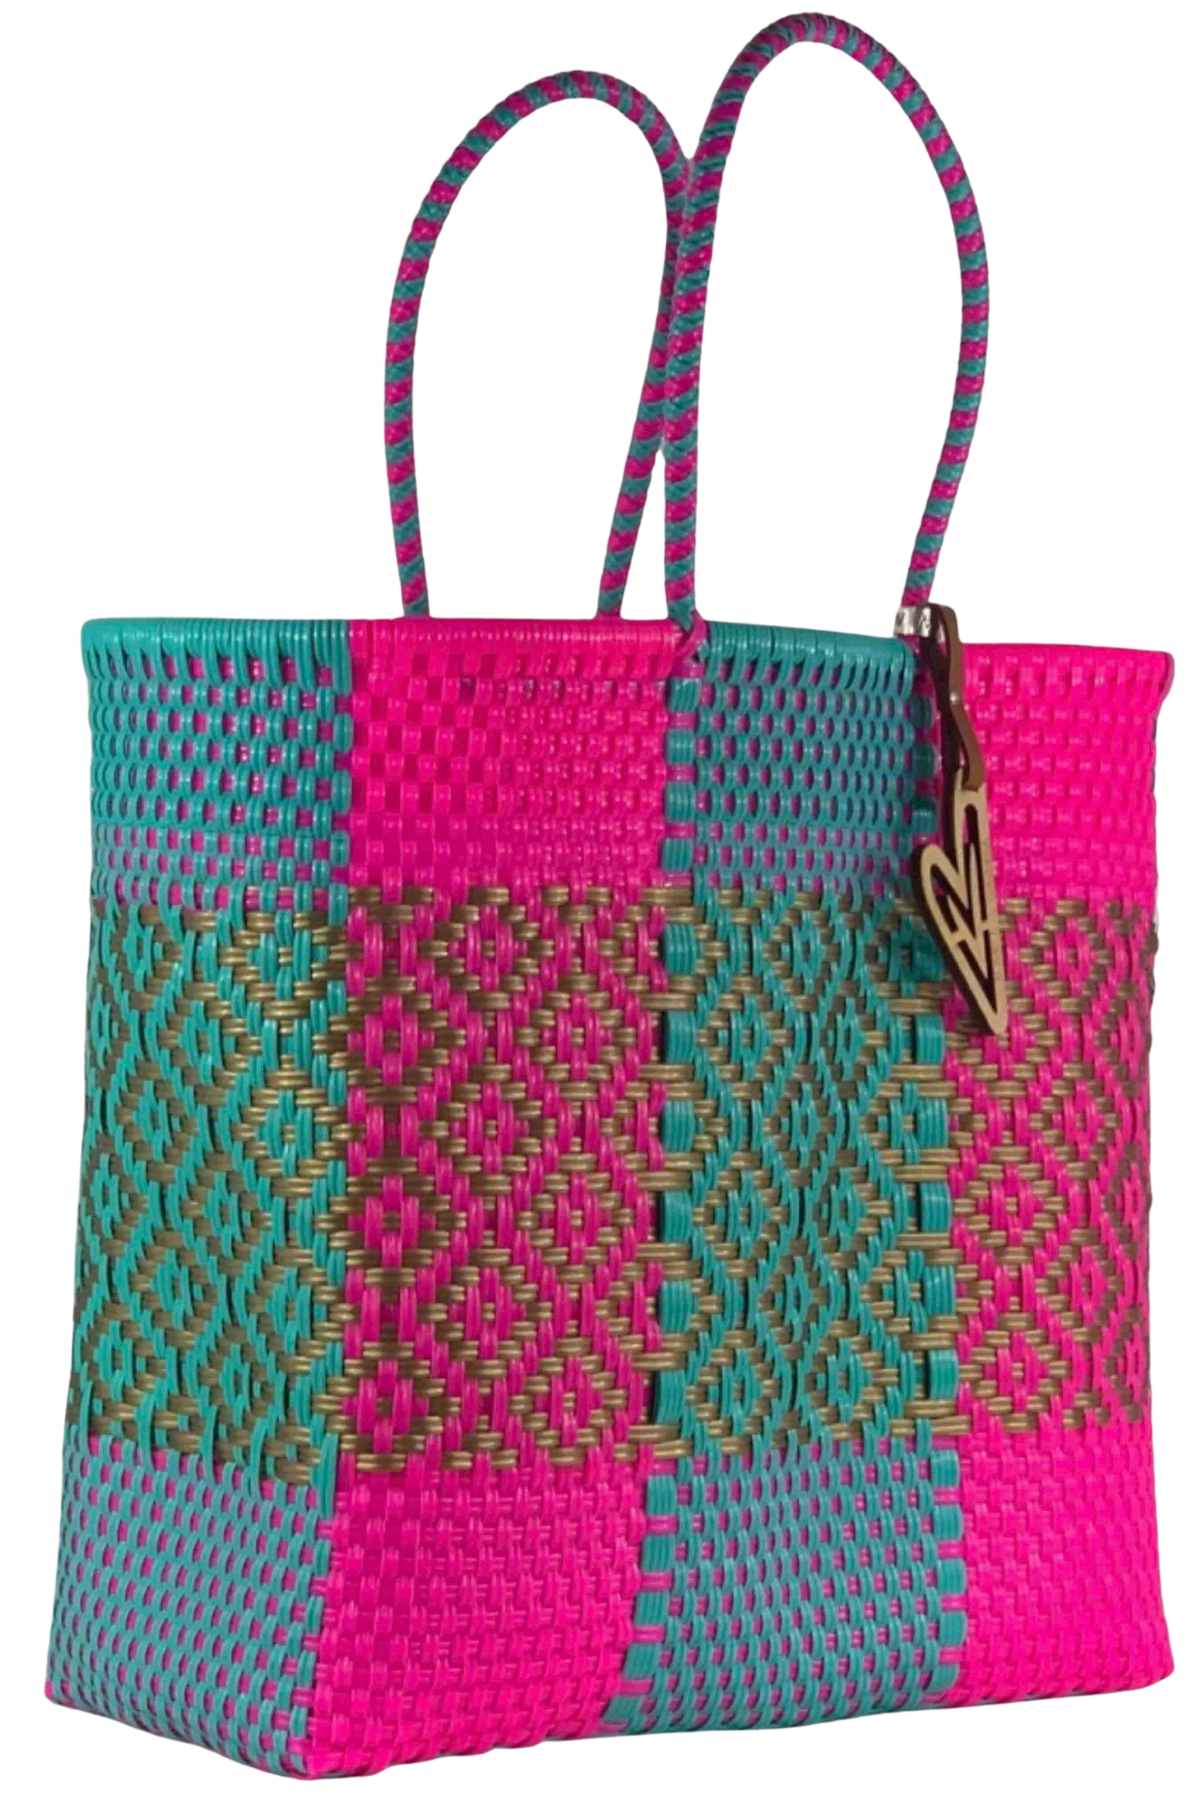 Large Pink and Turquoise ATEOR 190 Tote Bag by My Maria Victoria